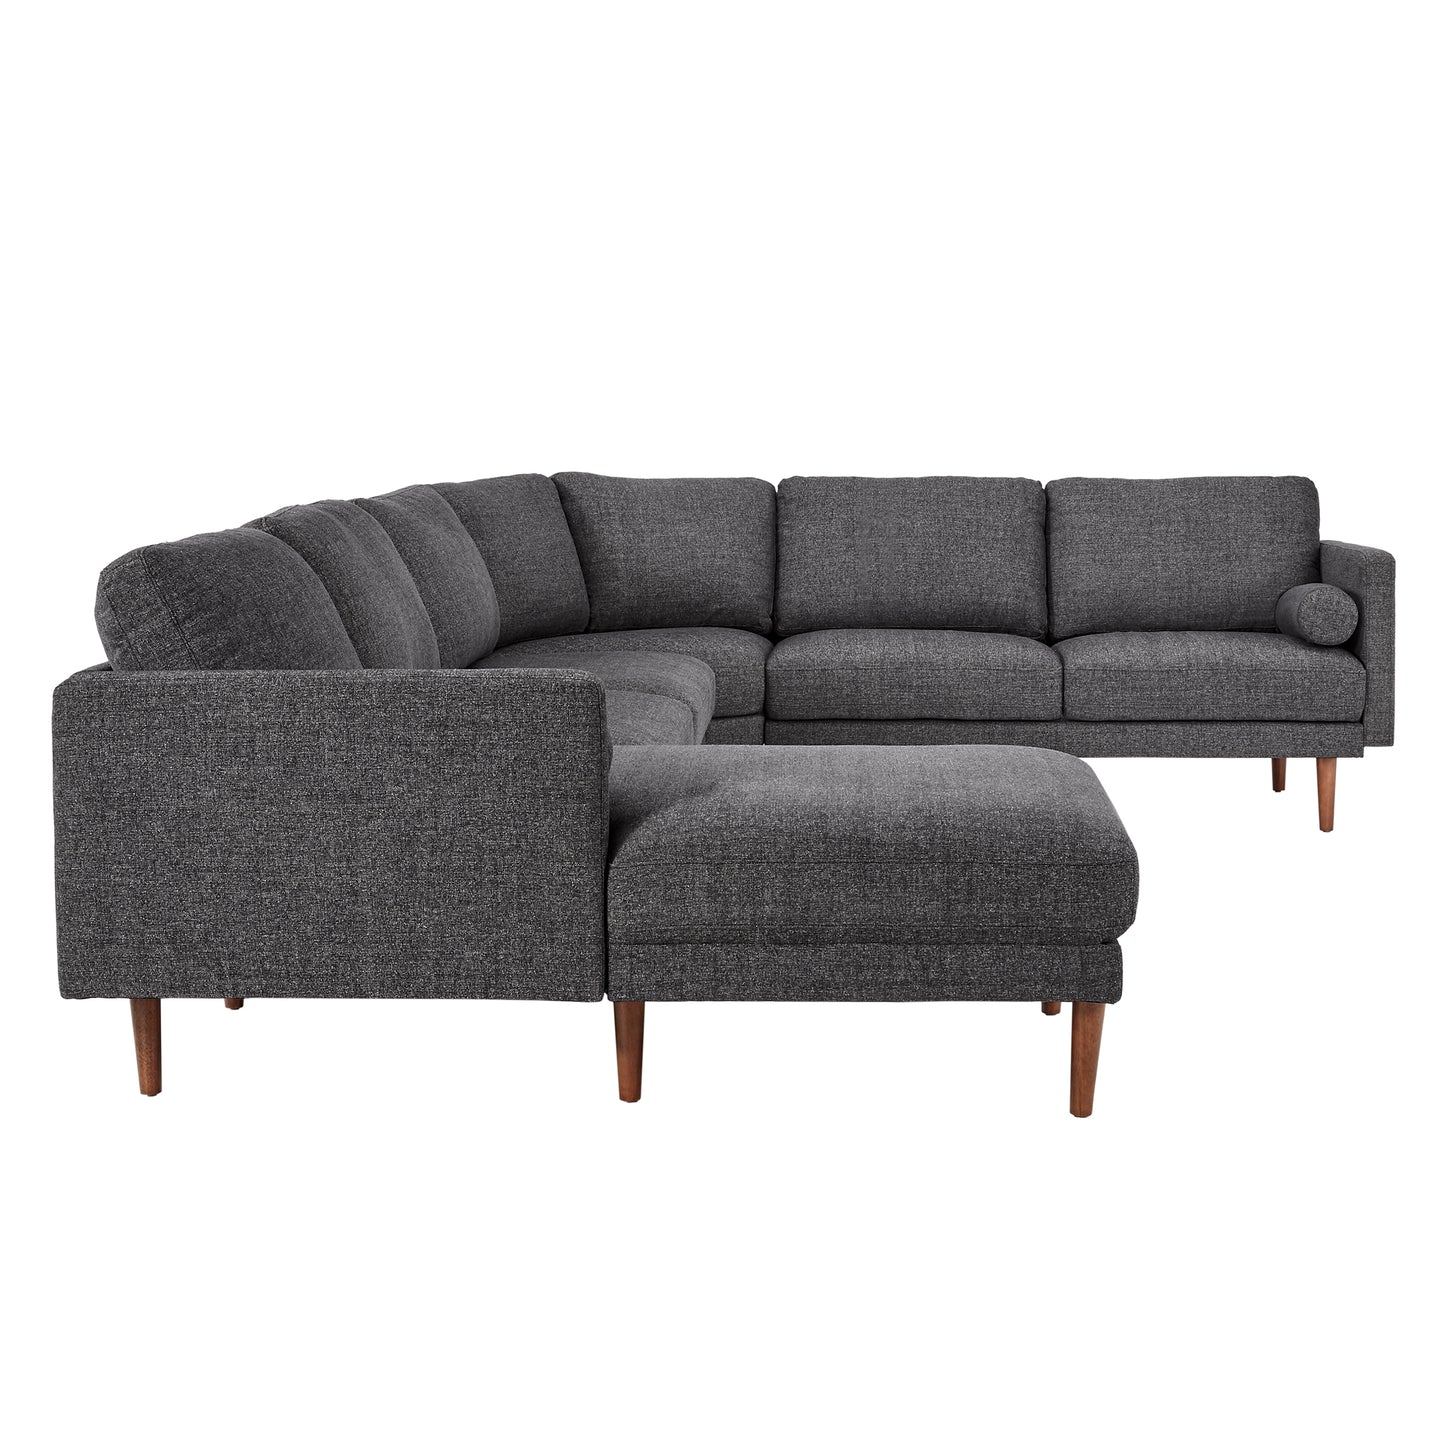 Mid-Century Upholstered Sectional Sofa - Black, 7-Seat, U-Shape Sectional with Left-Facing Chaise